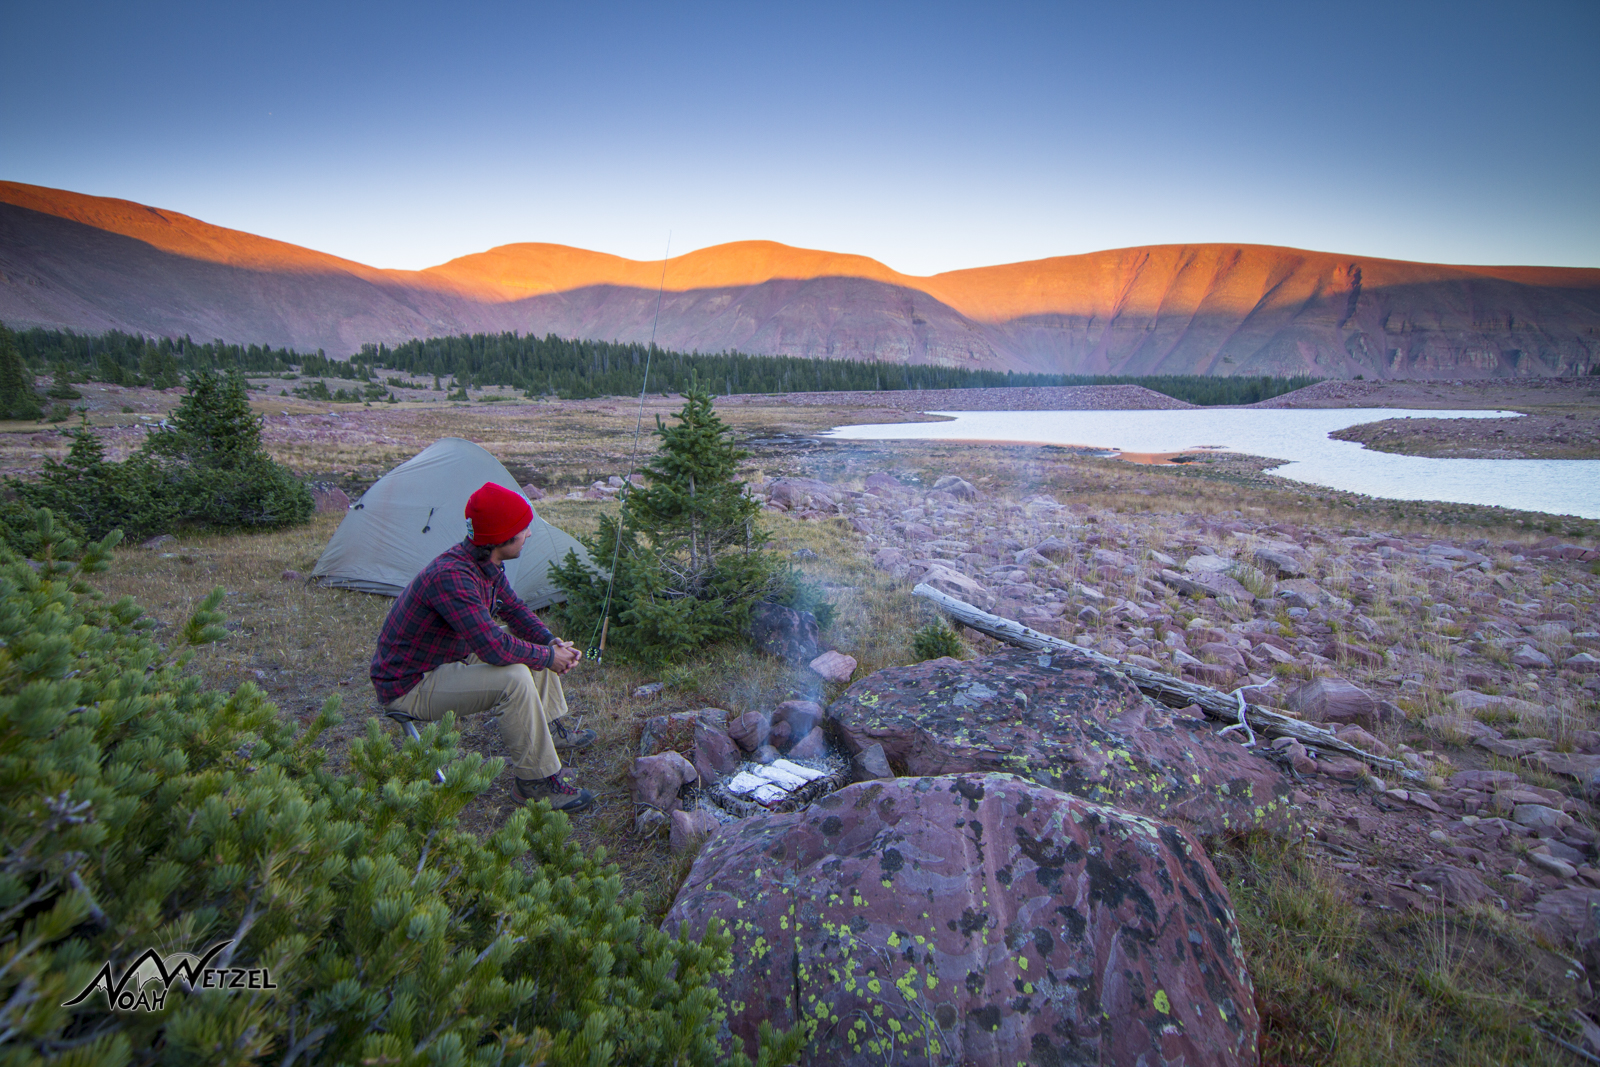 Self Portrait. Enjoying twilight while cooking up some fish at East Timothy Lake. High Uintas Wilderness